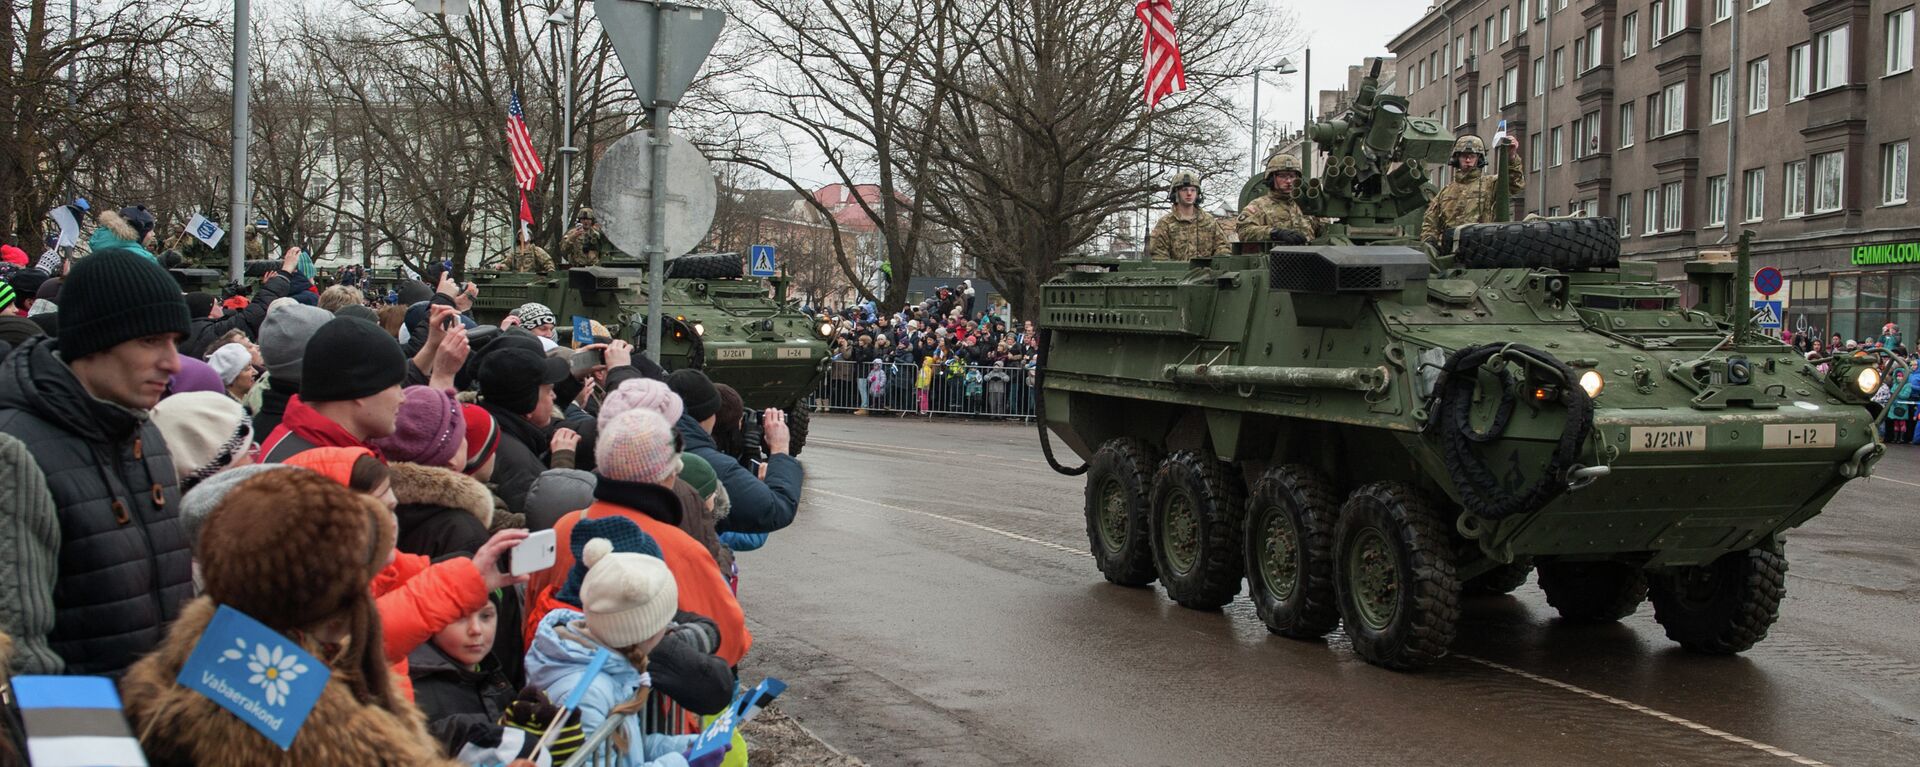 A tank with an US flag takes part in a military parade to celebrate 97 years since first achieving independence in 1918 on February 24, 2015 in Narva, Estonia - Sputnik International, 1920, 08.12.2021